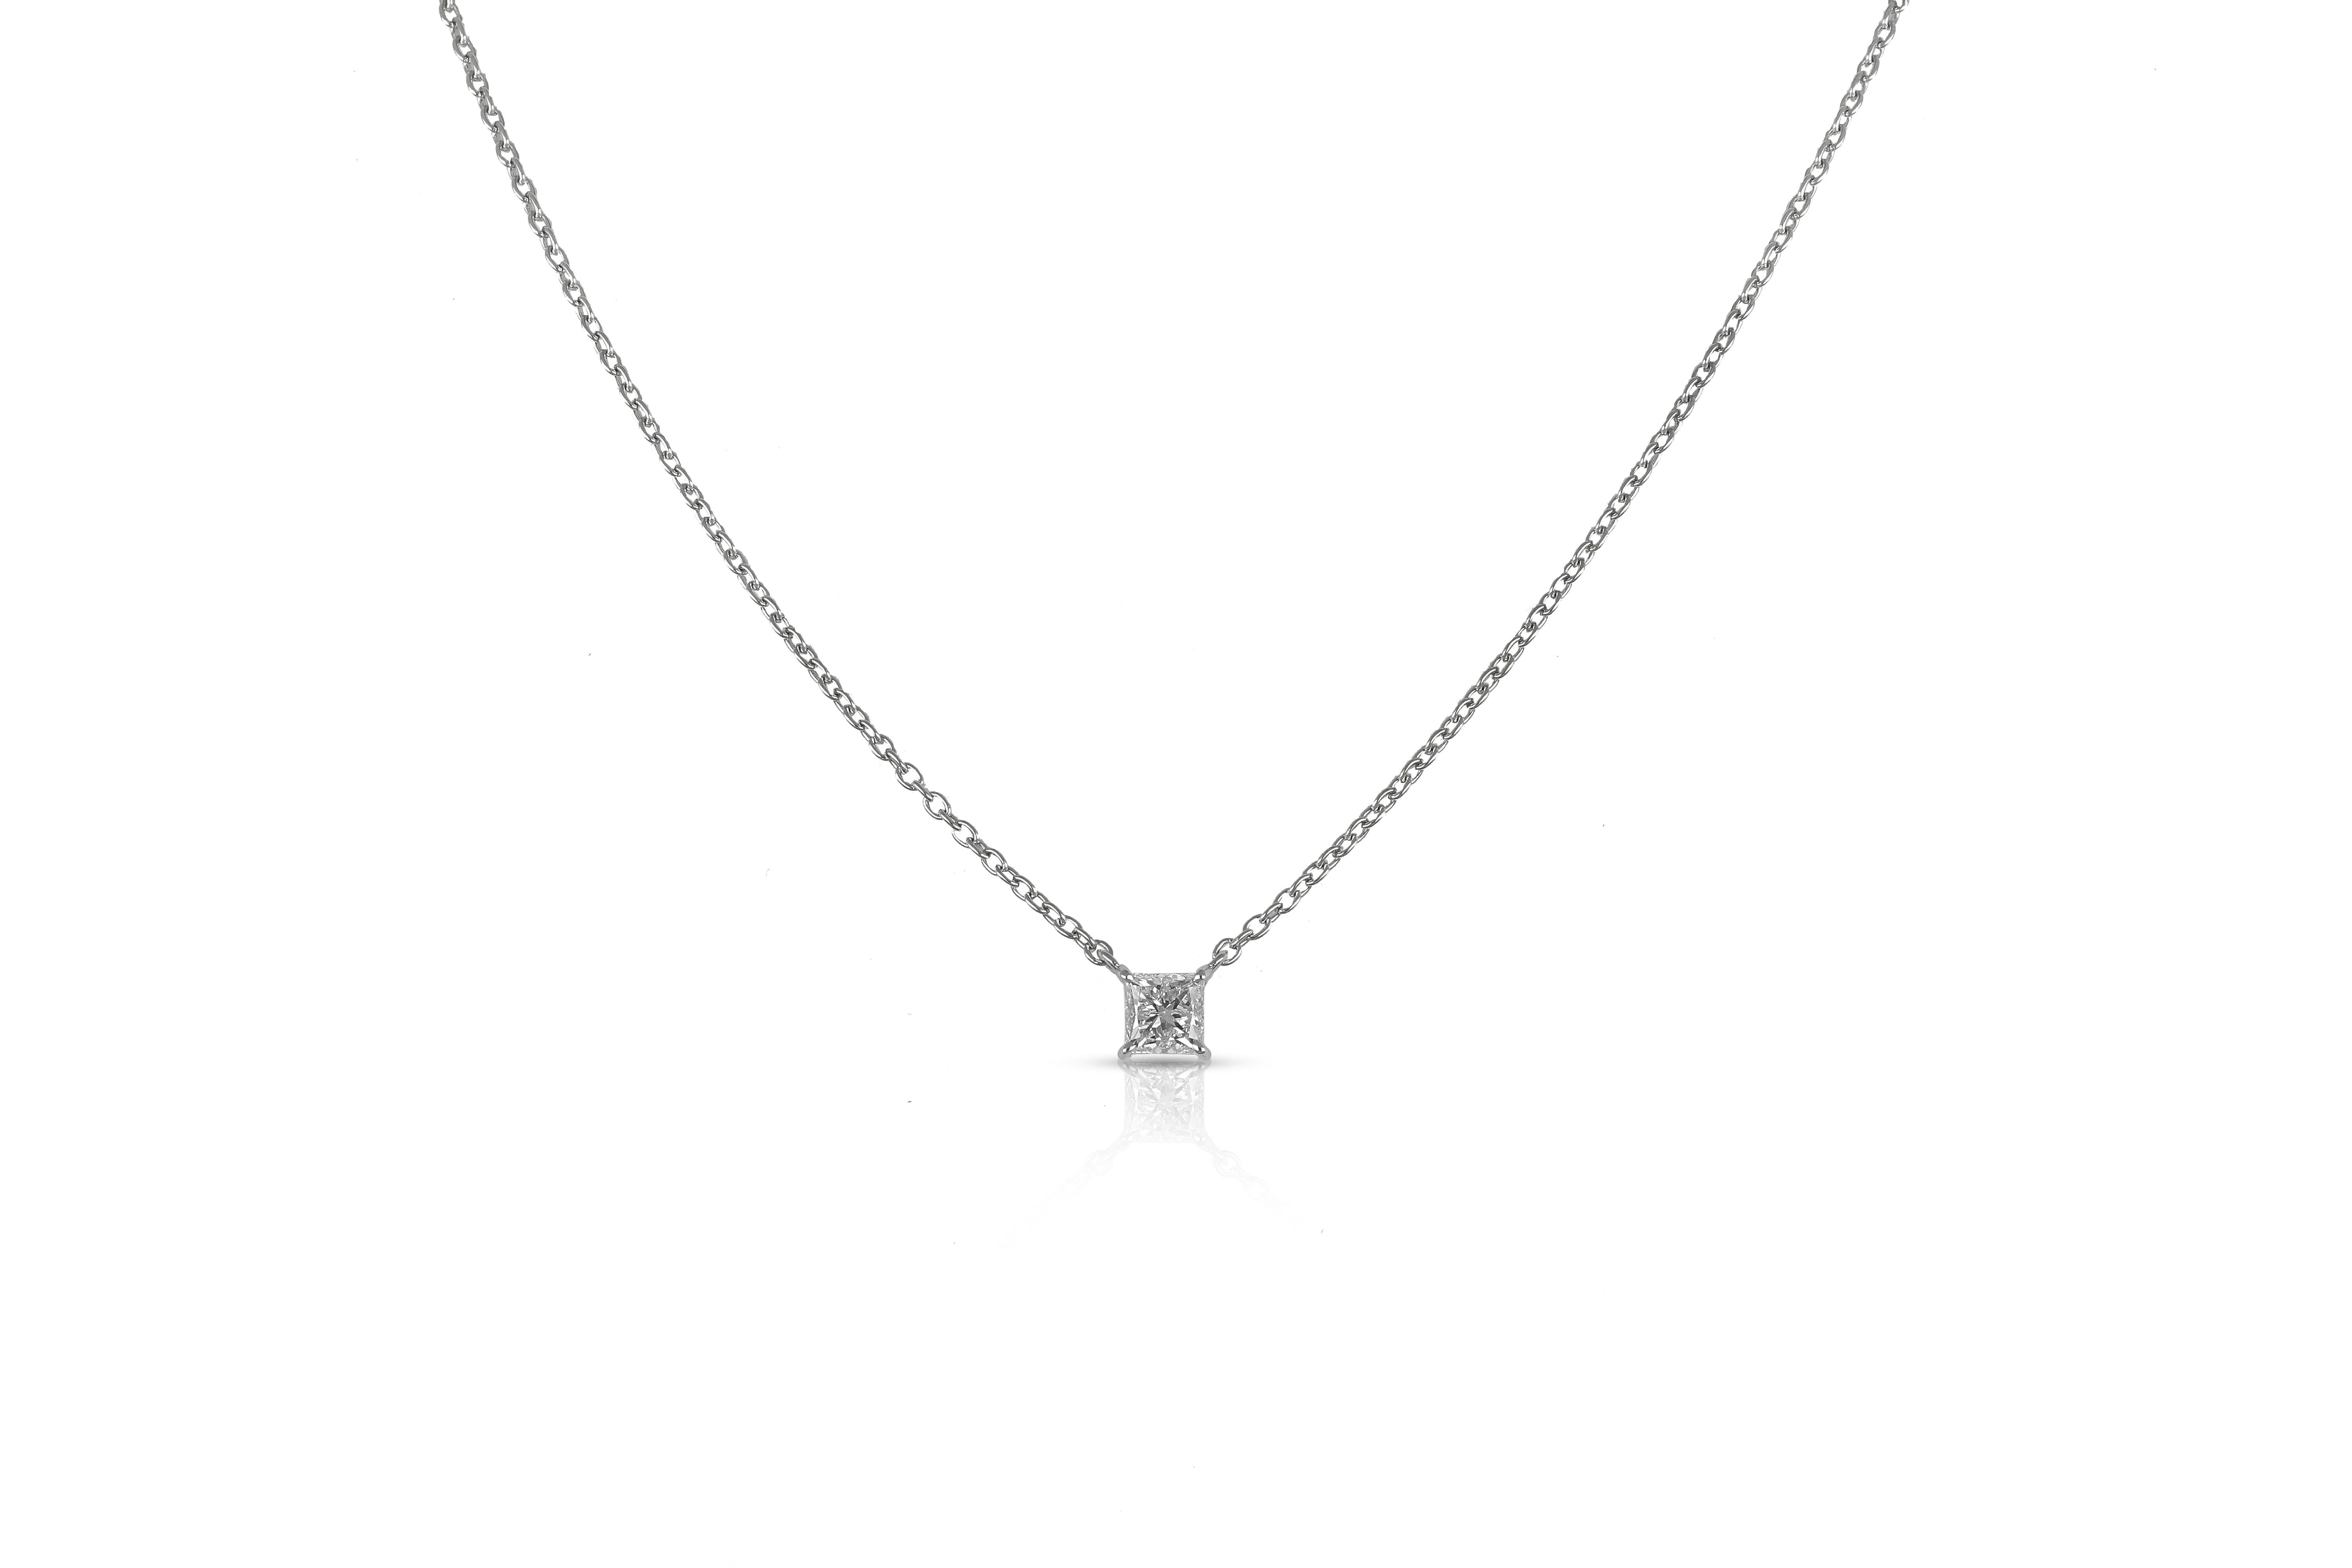 This truly enduring 18 karat gold pendant set with a princess cut diamond demonstrates the exceptional quality and refinement which makes it perfect for both daywear and eveningwear. Suspended from a fine white gold chain, the centerpiece stone